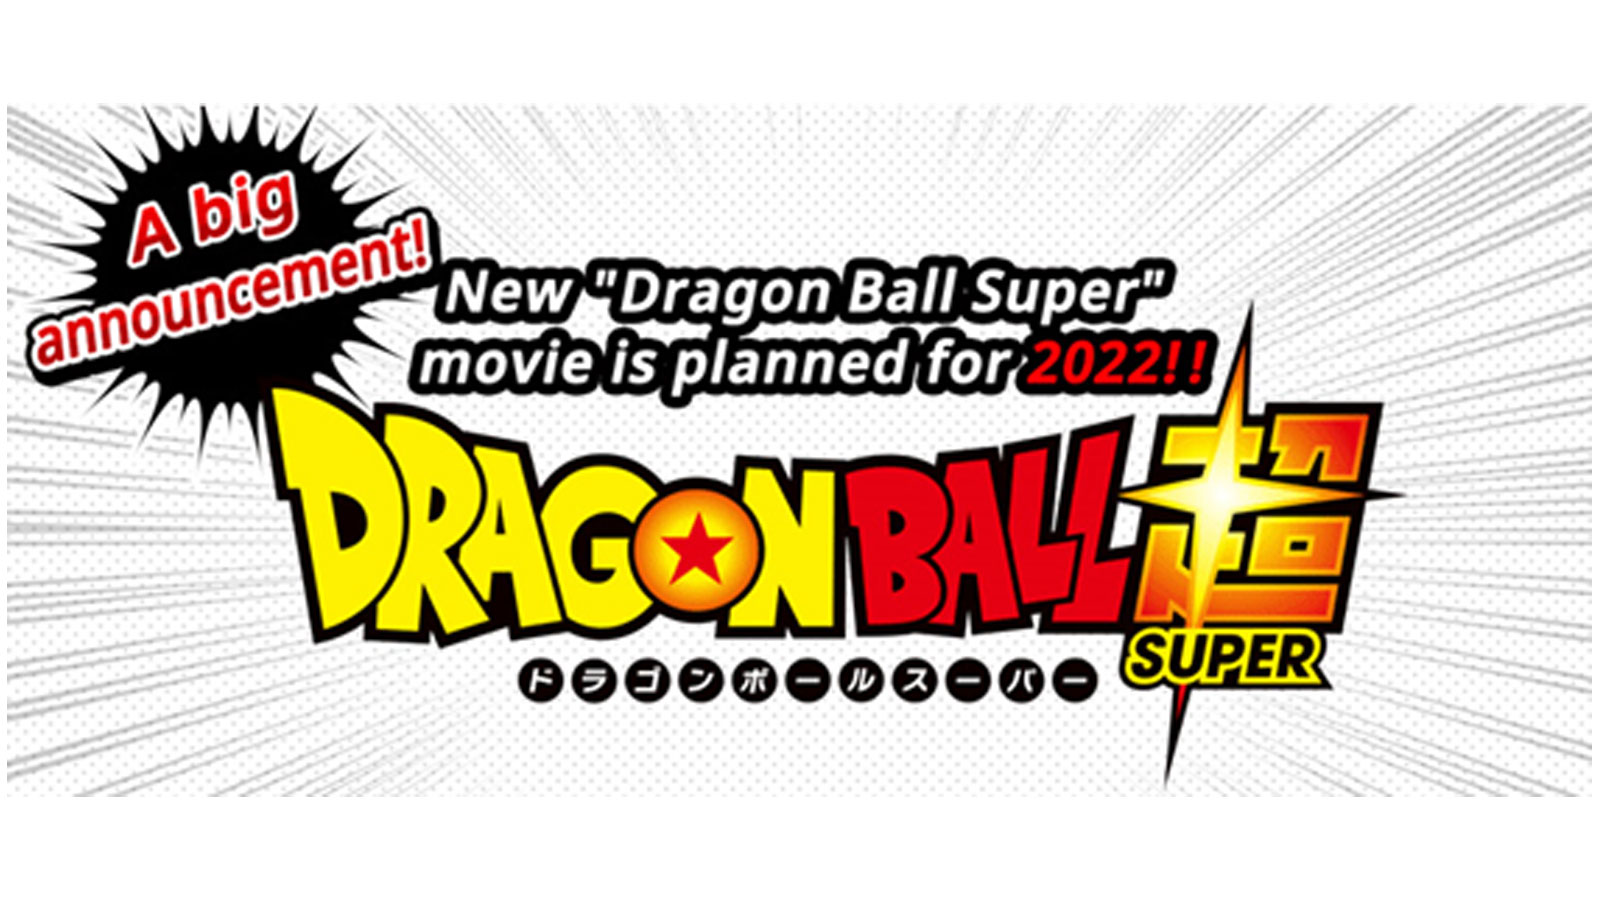 TOEI ANIMATION MAKES SPECIAL ANNOUNCEMENT OF NEW “DRAGON BALL SUPER” MOVIE IN 2022 *NEW POST*